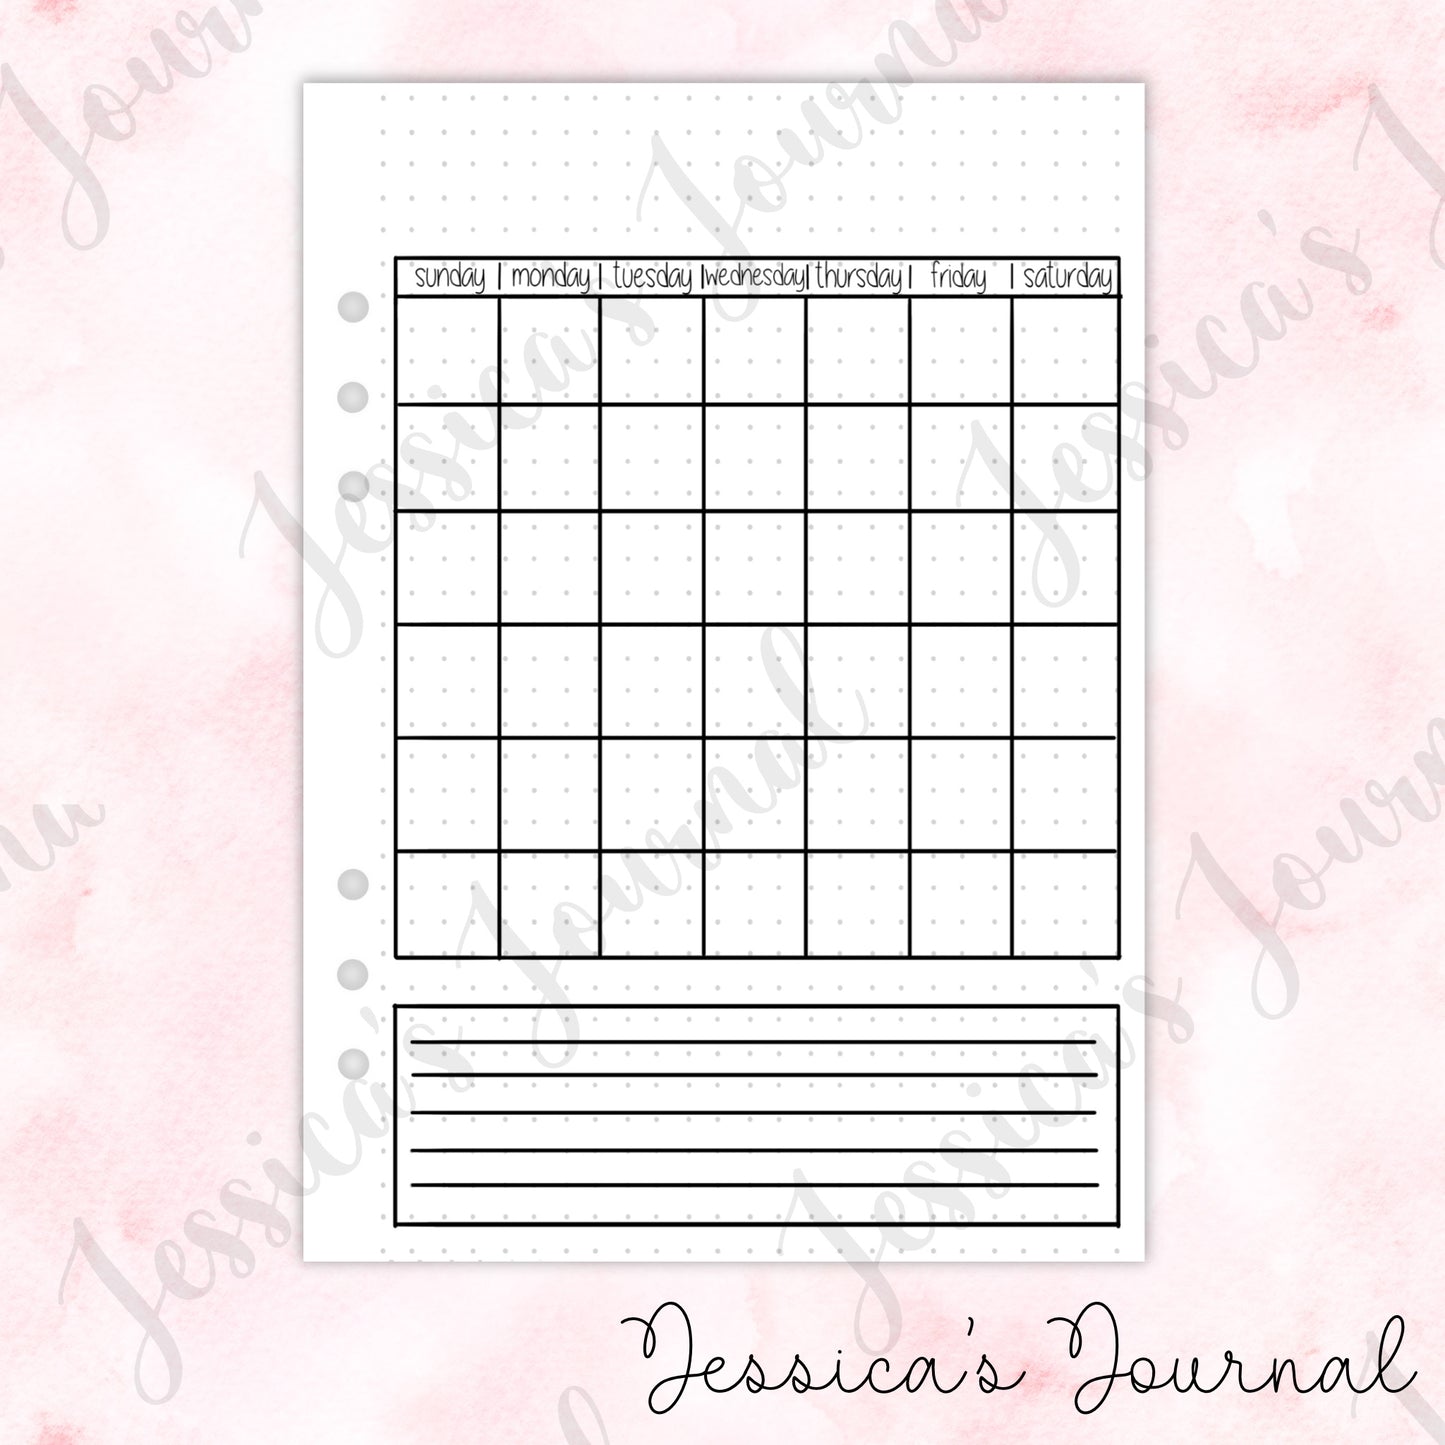 Monthly Overview Tracker | Journal Spread